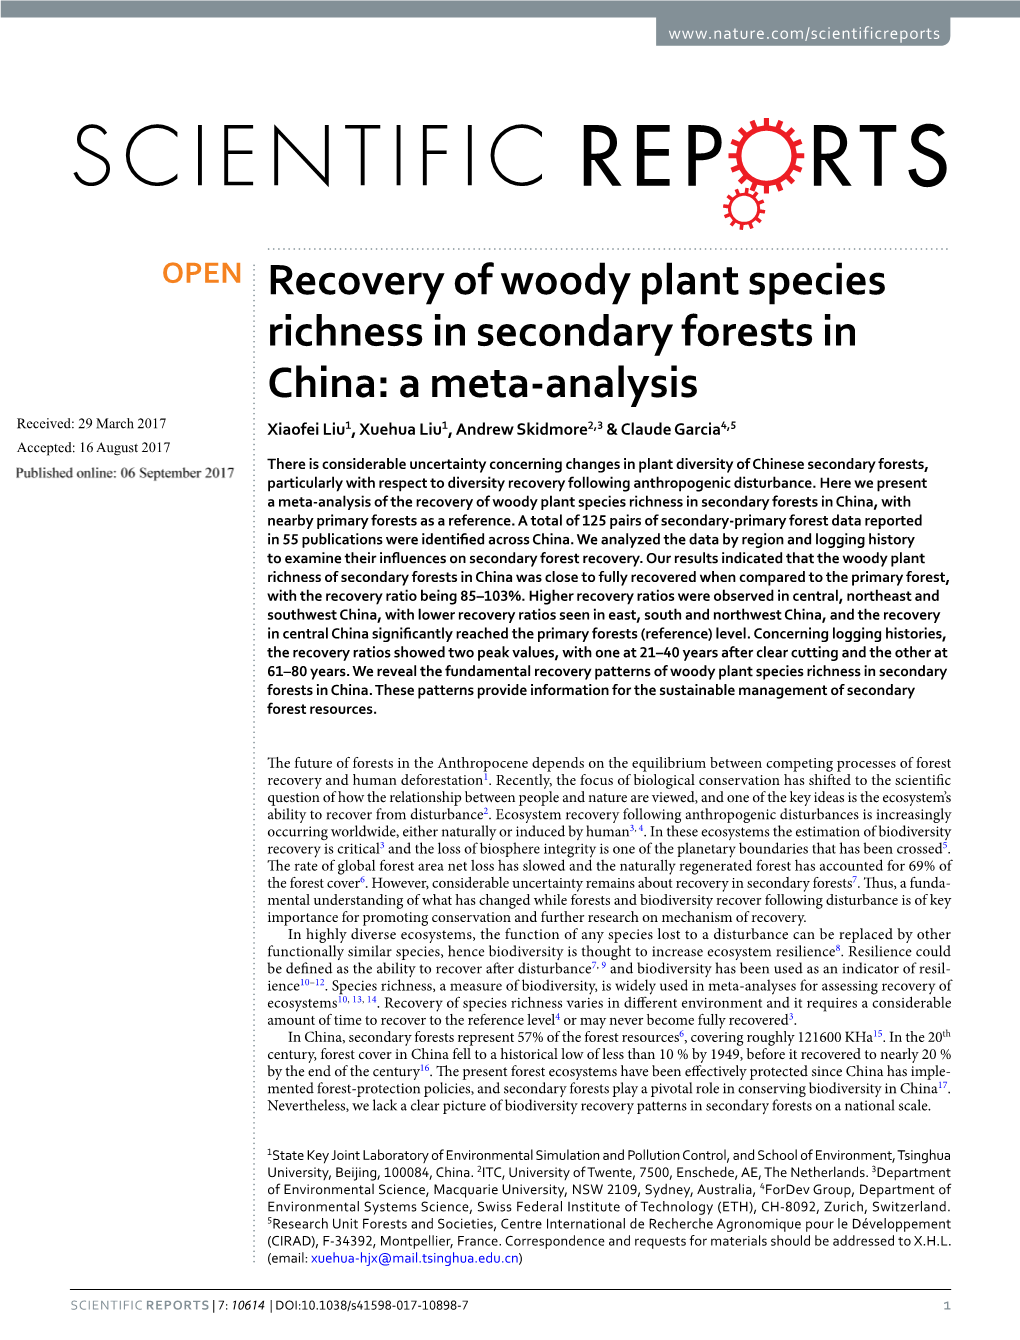 Recovery of Woody Plant Species Richness in Secondary Forests in China